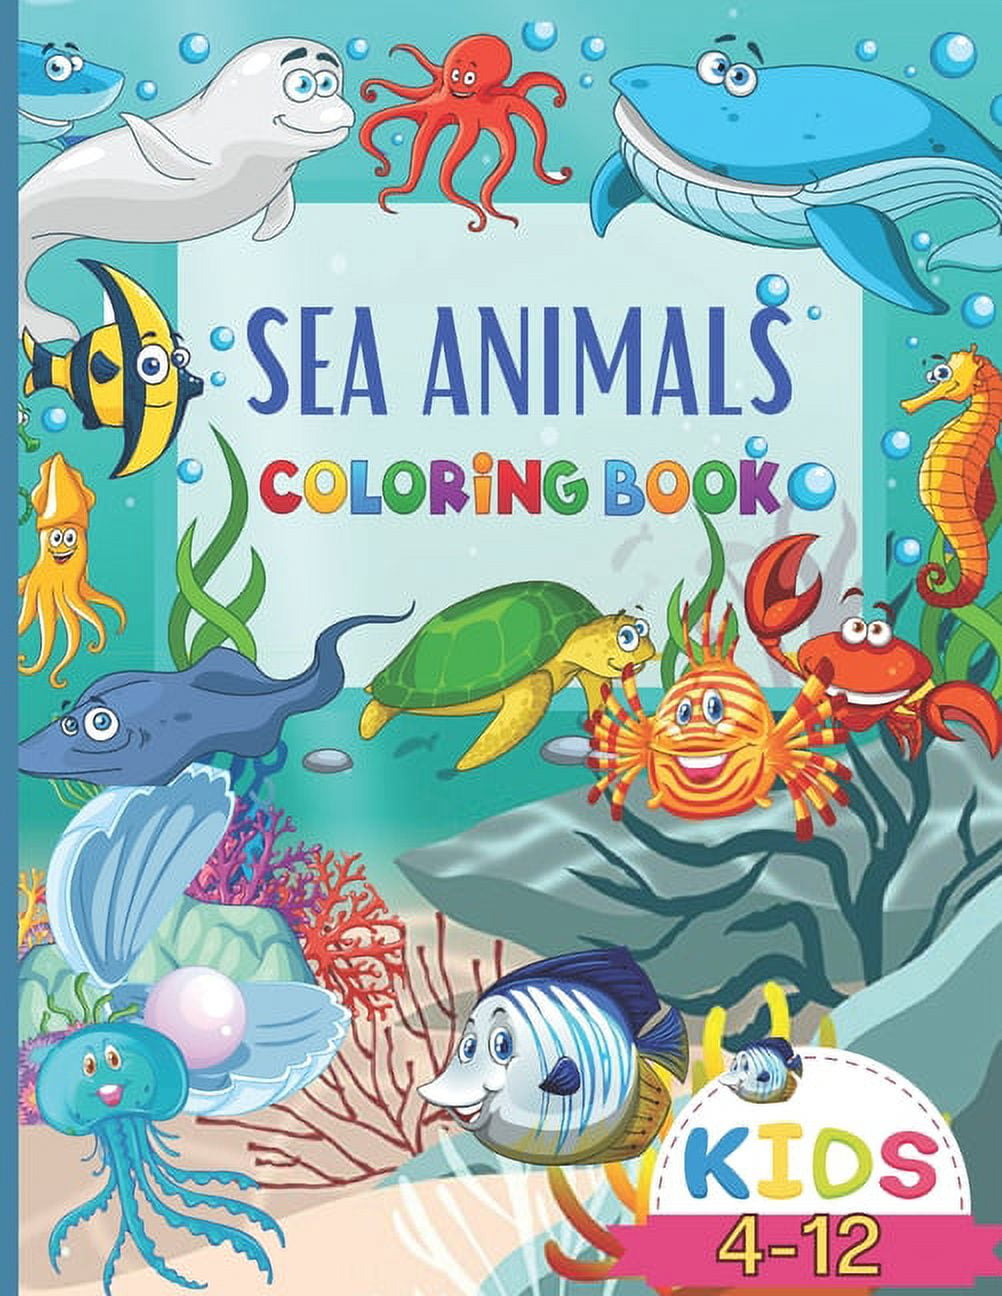 Sea Life Coloring Book: Sea Creatures Coloring Set For Kids Ages 4-8  Featuring Tropical Fish, Beautiful Coral Reefs and Stunning Ocean Life and   Book For Kids - 46 pages 8.5 x